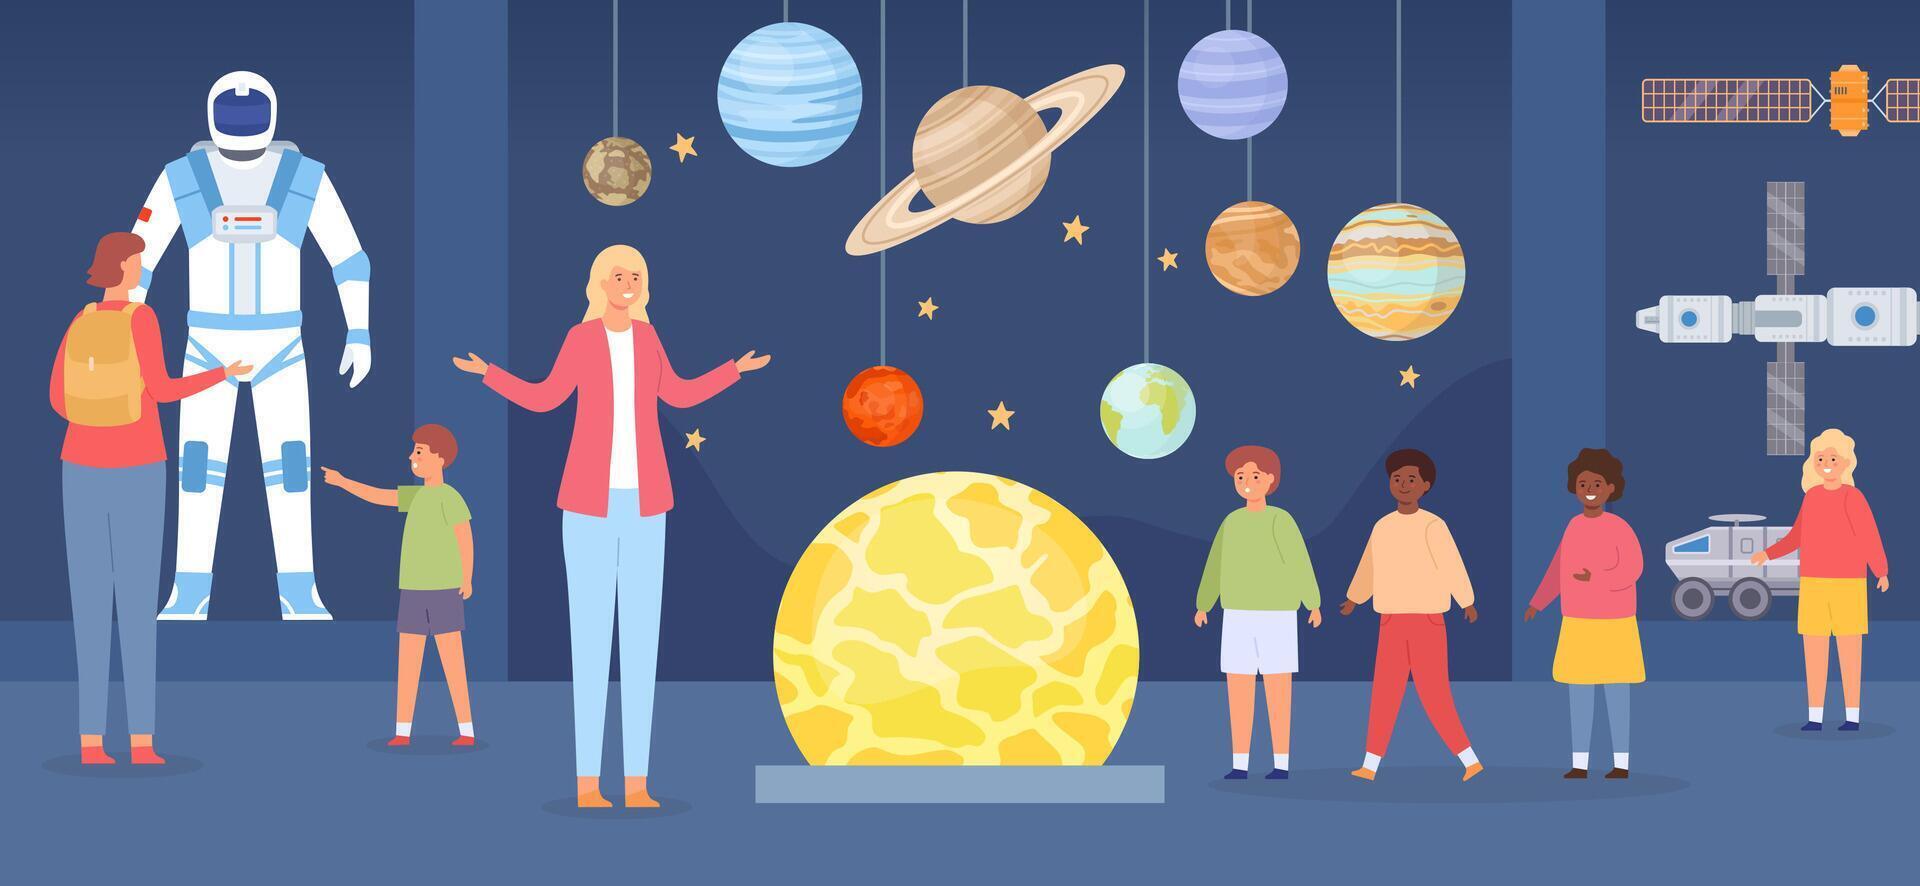 Planetarium excursion. Adults and kids characters in astronomy gallery. School trip to space museum. Flat cosmos exhibition vector concept